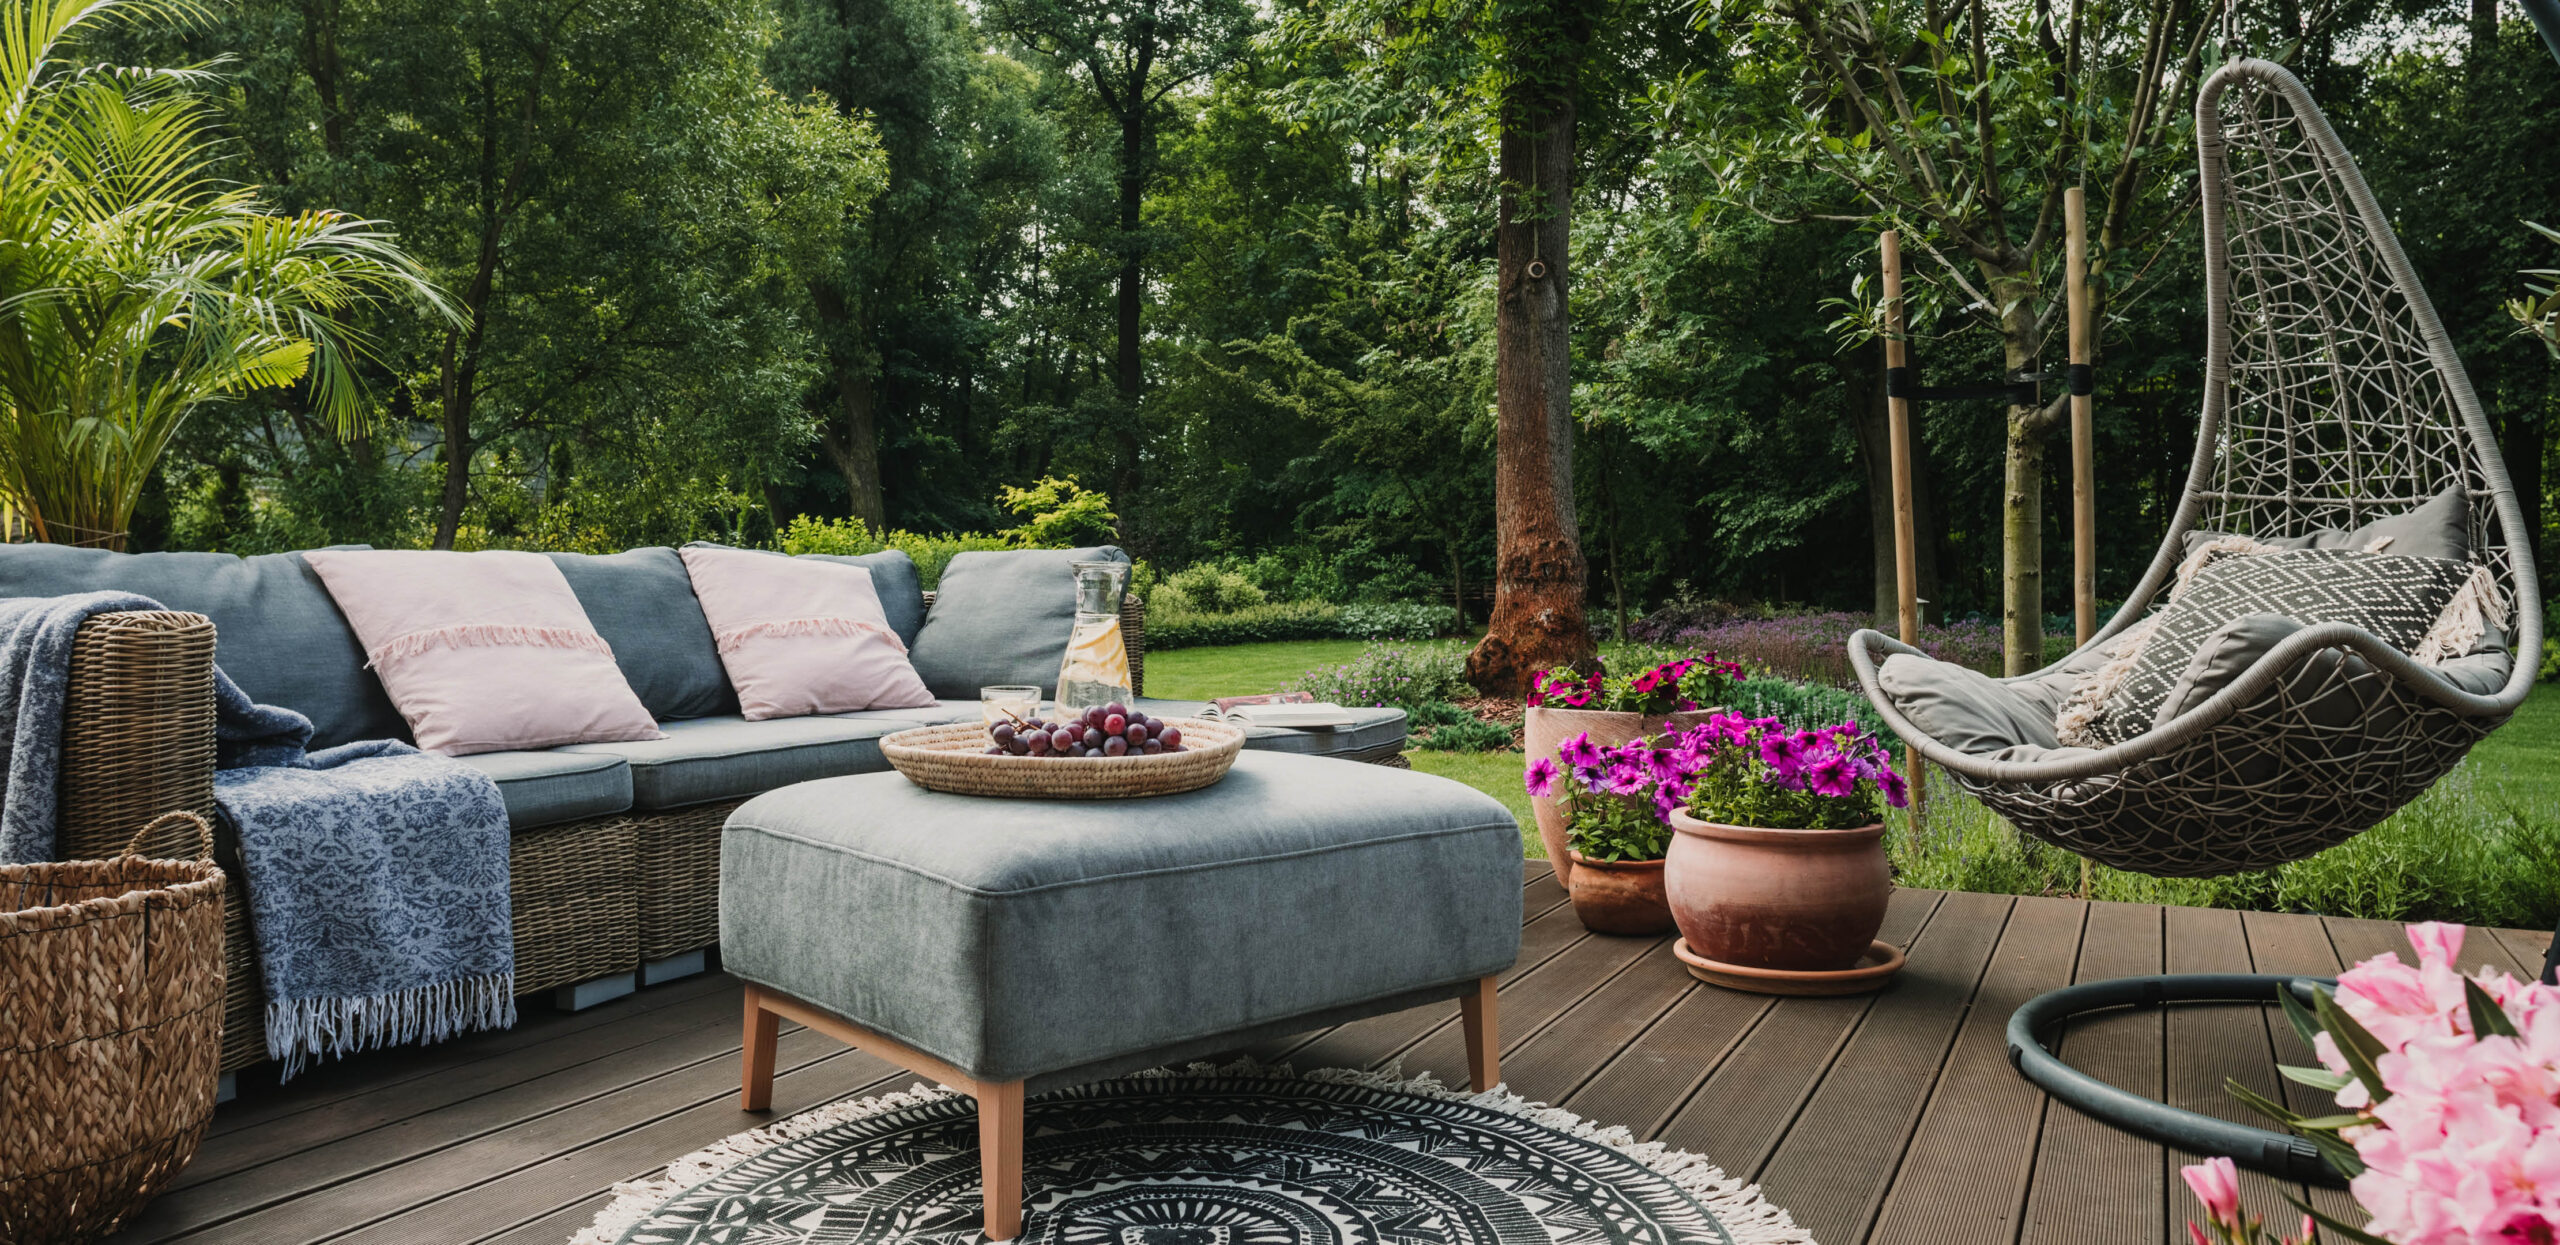 A beautiful, tree-filled back yard with a deck filled with comfortable furniture, a rug and flowers.